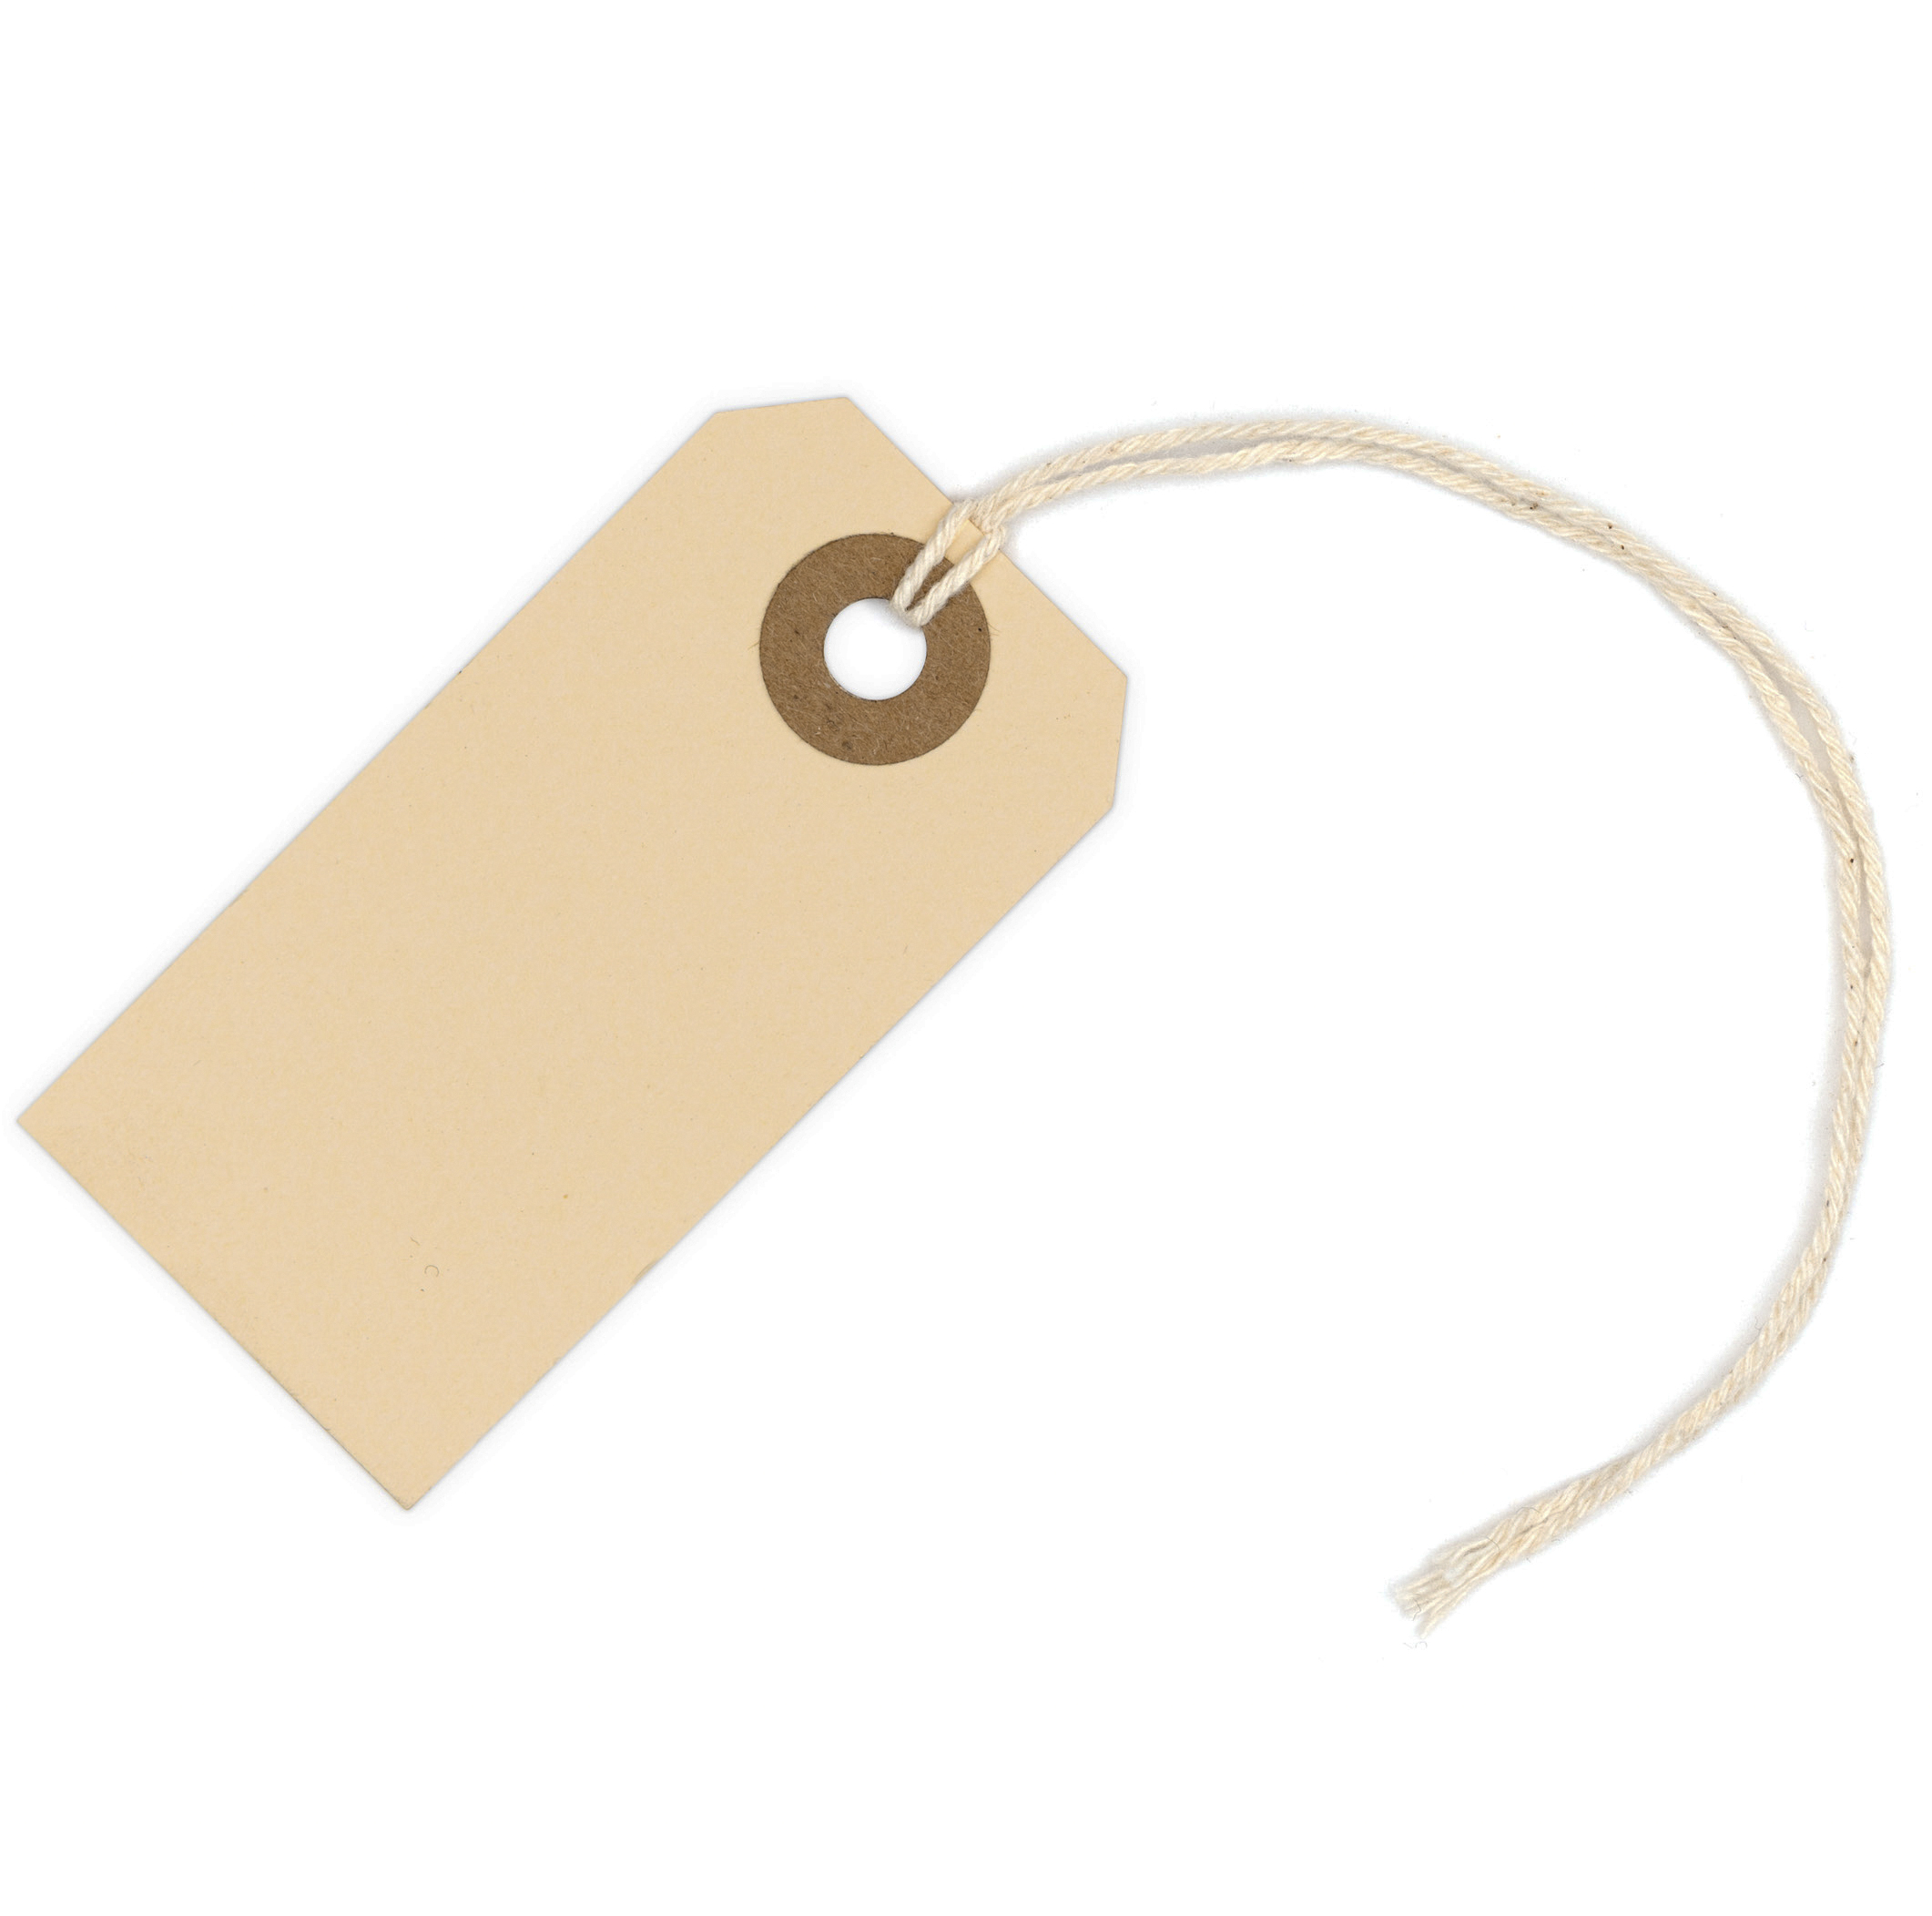 Case of 1000 Aviditi G11011G 13 Point Cardstock Shipping Tag White 2-3/4 Length x 1-3/8 Width 